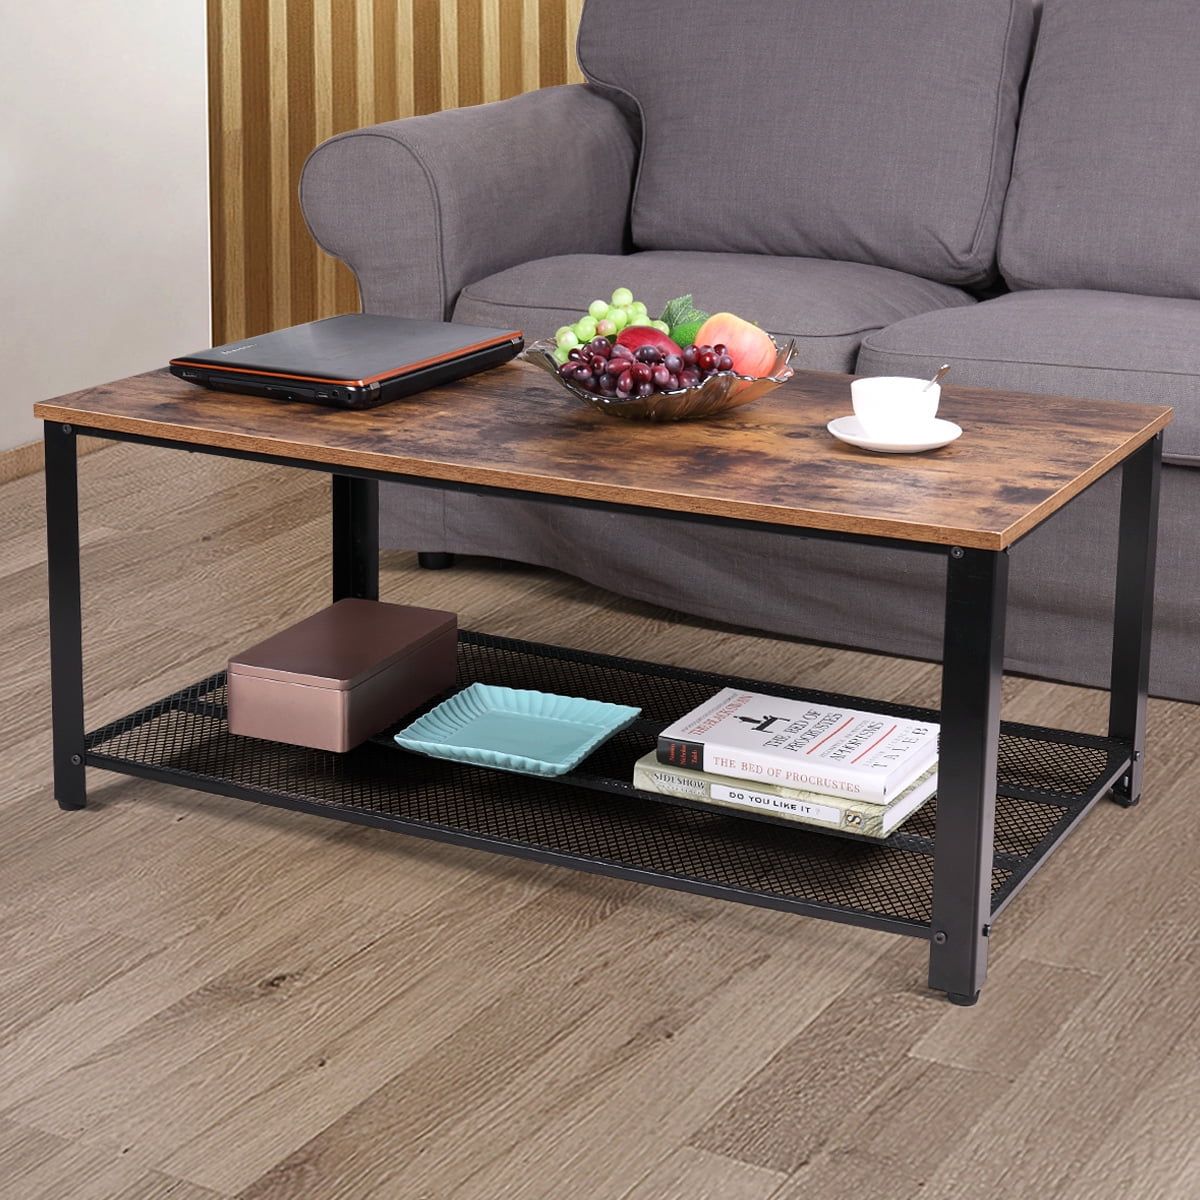 Jaxpety 2 Tier Cocktail Wood Coffee Table Rectangular Living Room Regarding Wood Coffee Tables With 2 Tier Storage (Gallery 1 of 20)